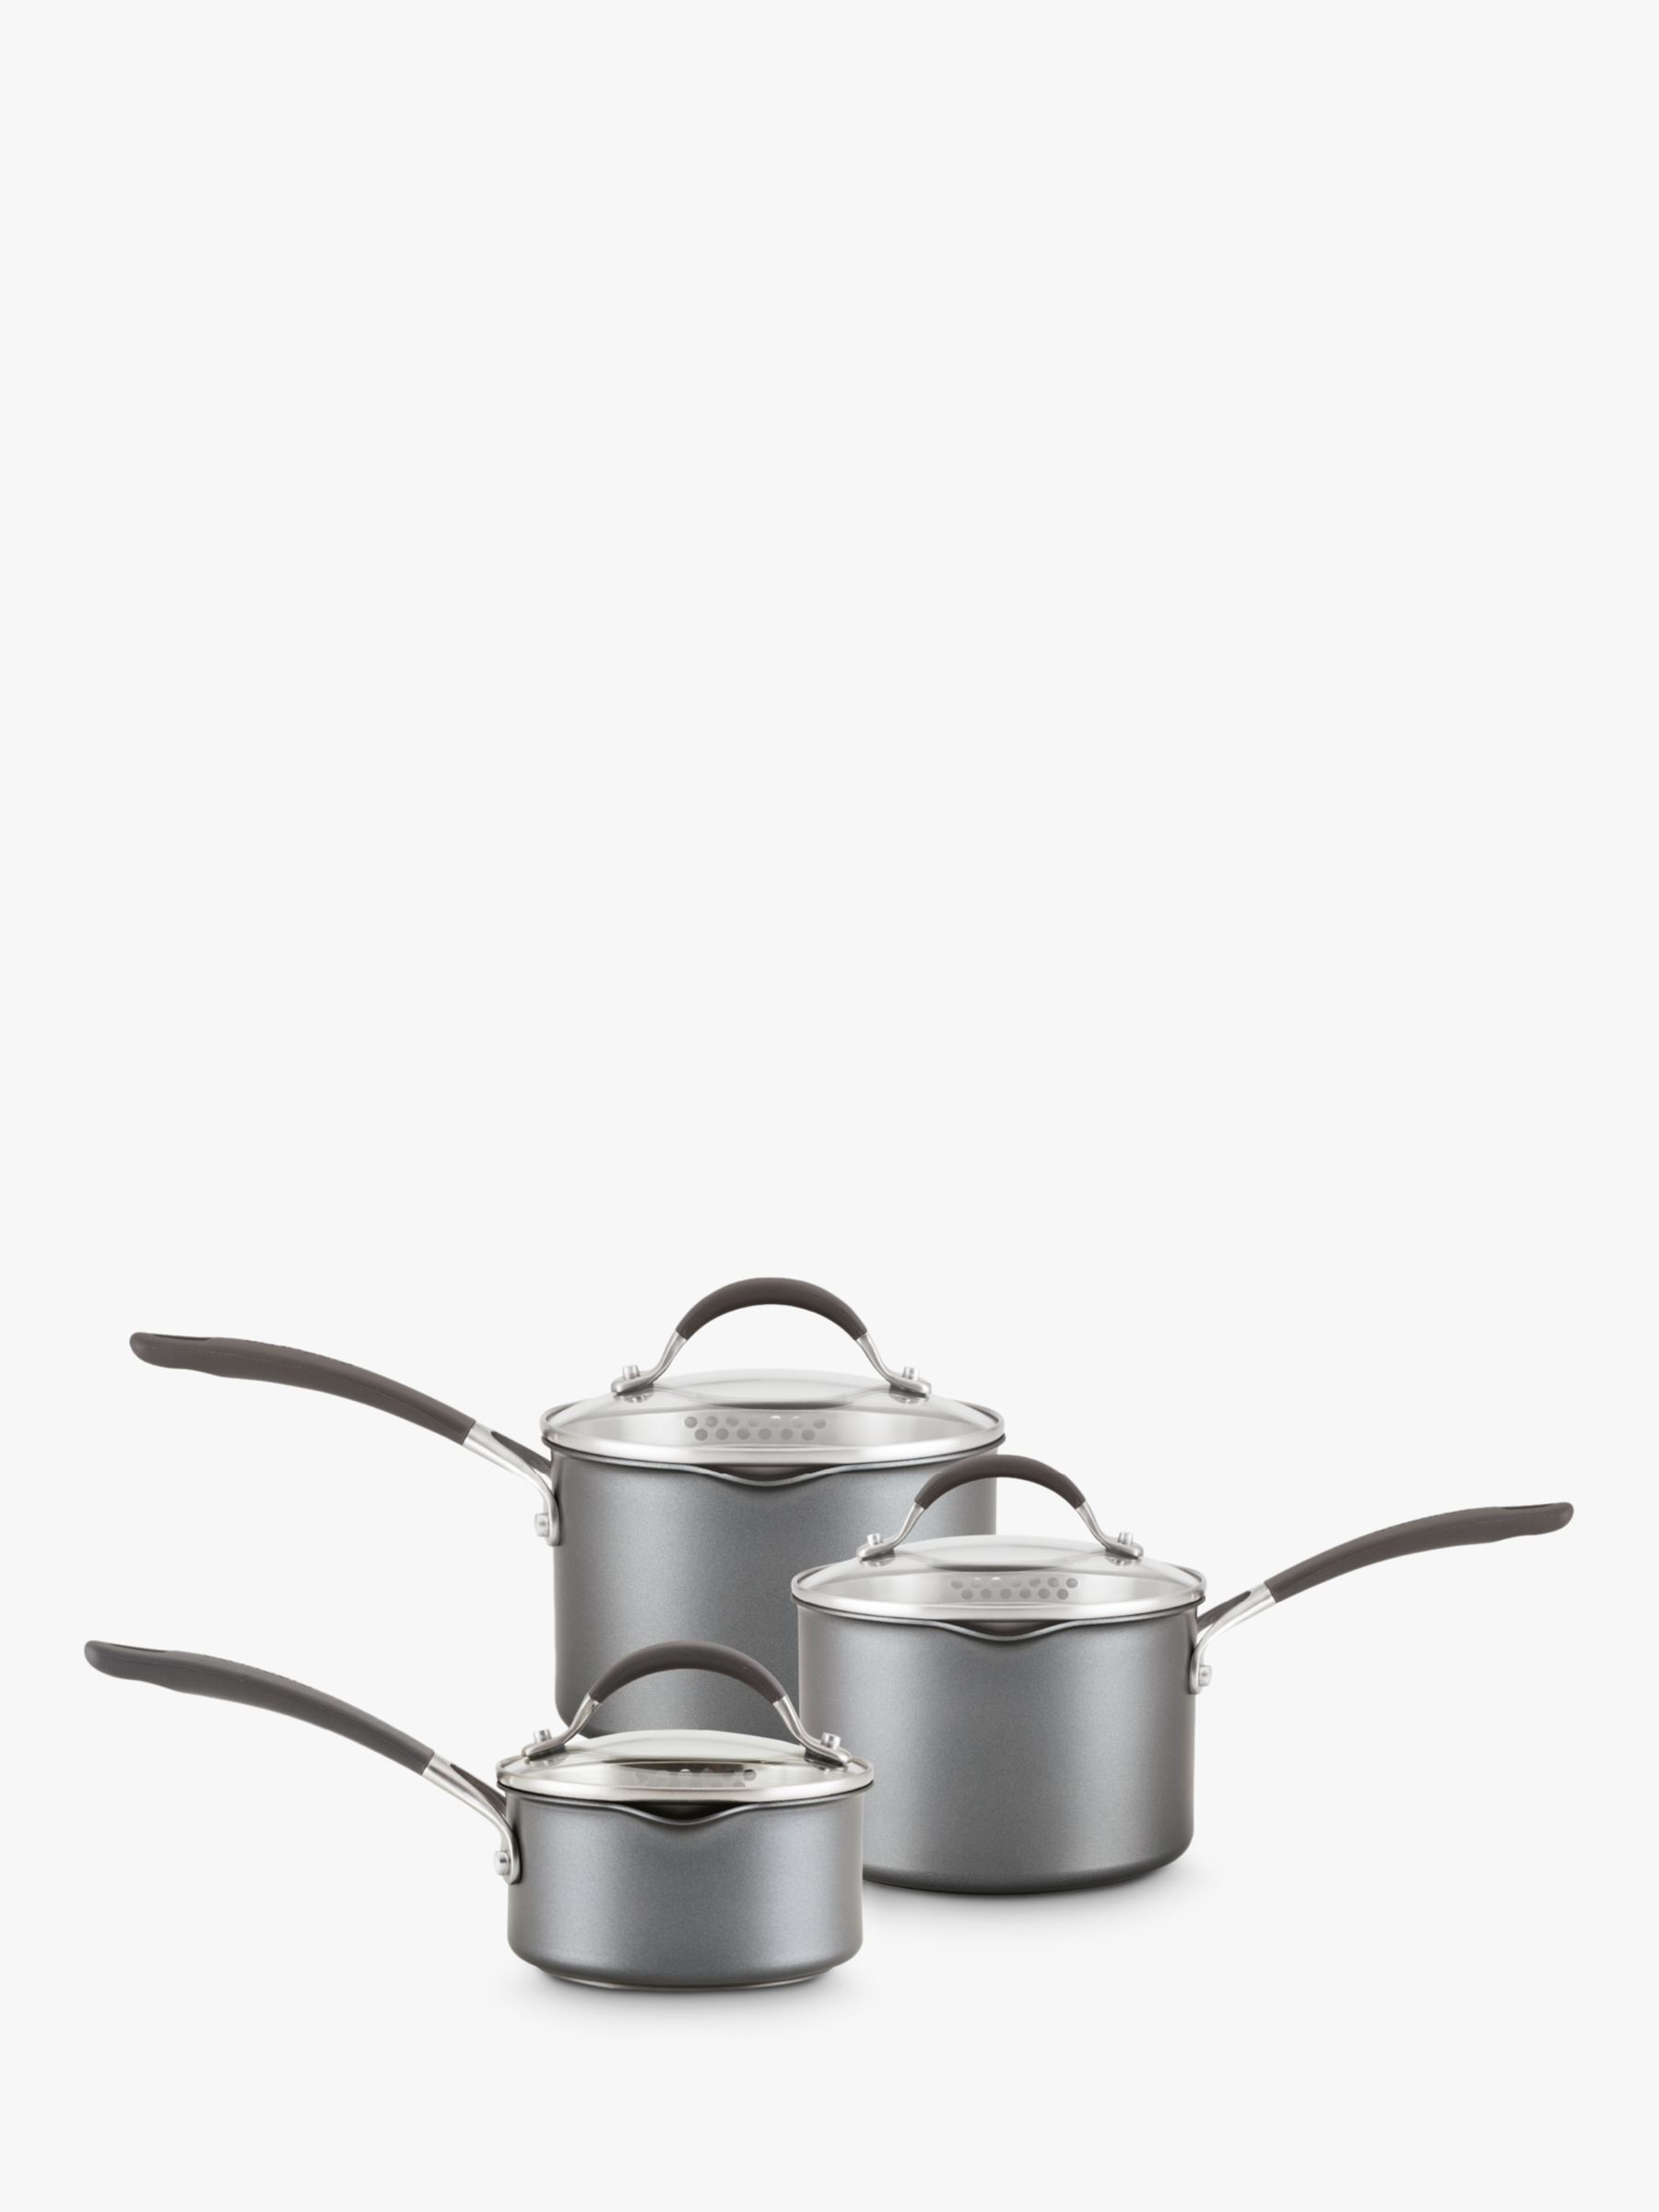 Circulon Non Stick Saucepan Set of 3 – Saucepans for Induction Hobs 16, 18 & 20cm with Toughened Glass Lids & Soft Grip Handles, Dishwa